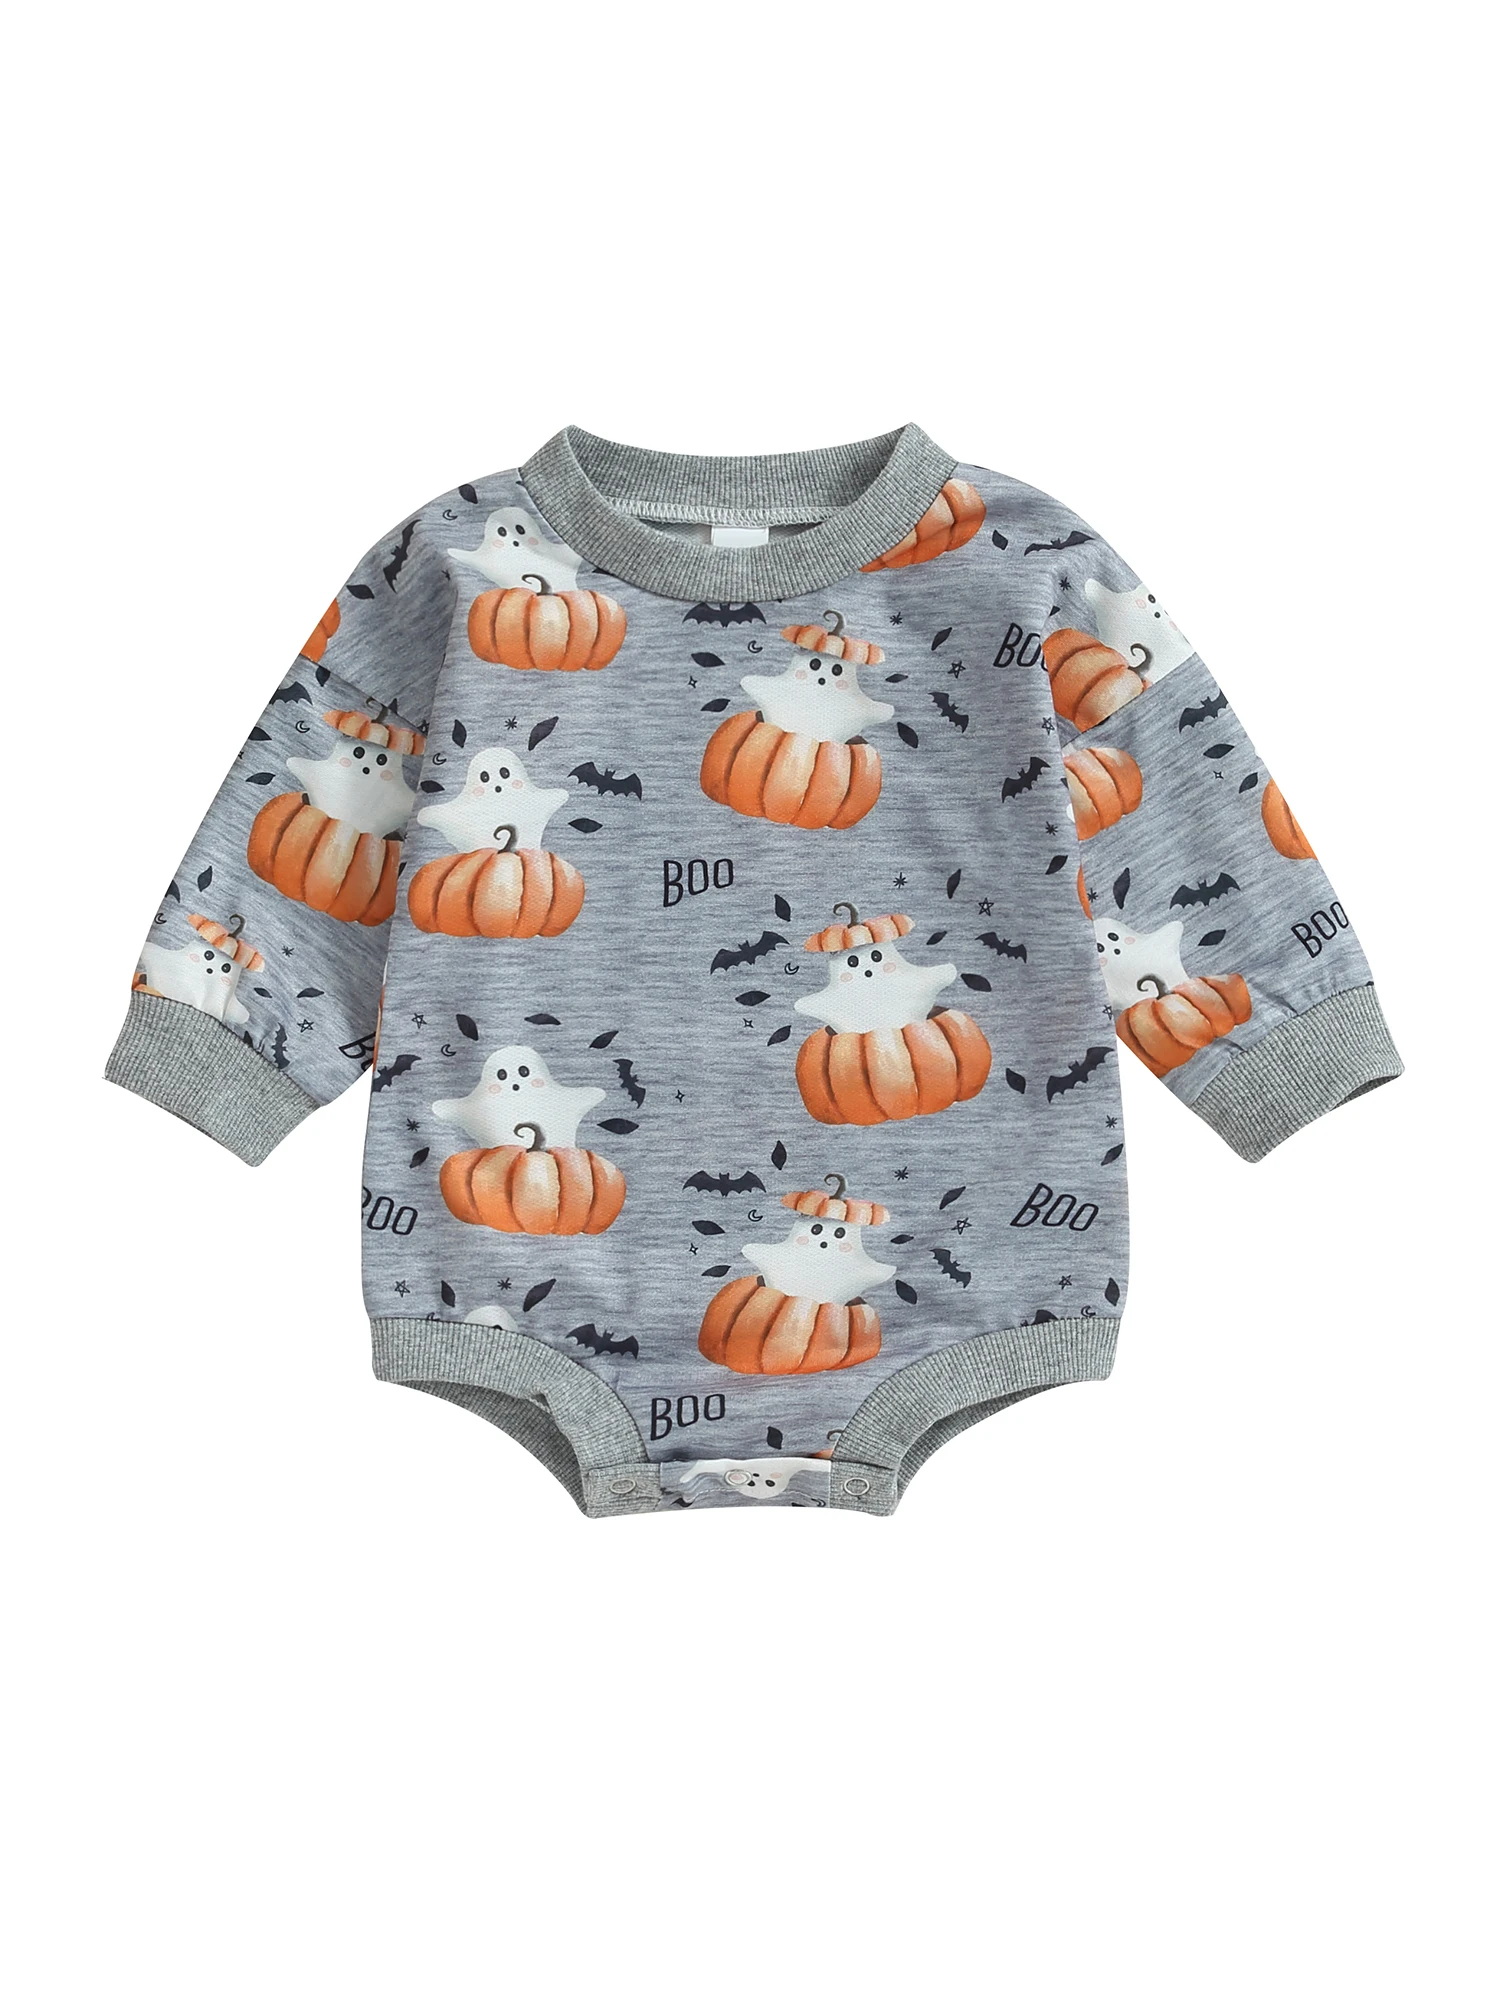 

Adorable Pumpkin-themed Halloween Costume for Newborn Baby Girls and Boys Oversized Sweater Romper with Sweatshirt